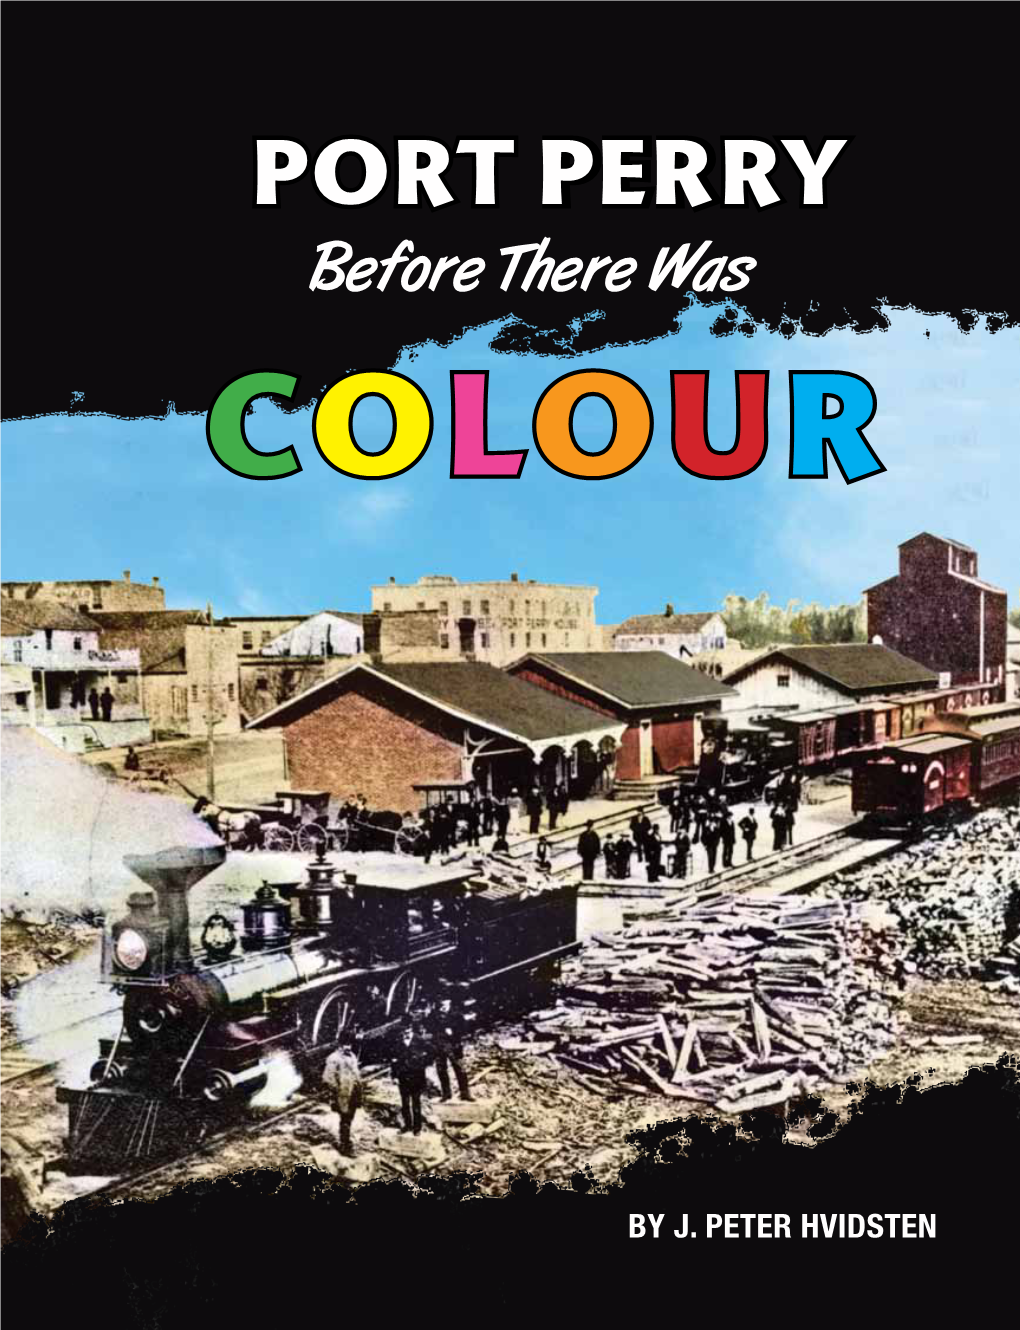 PORT PERRY Before There Was COLOUR